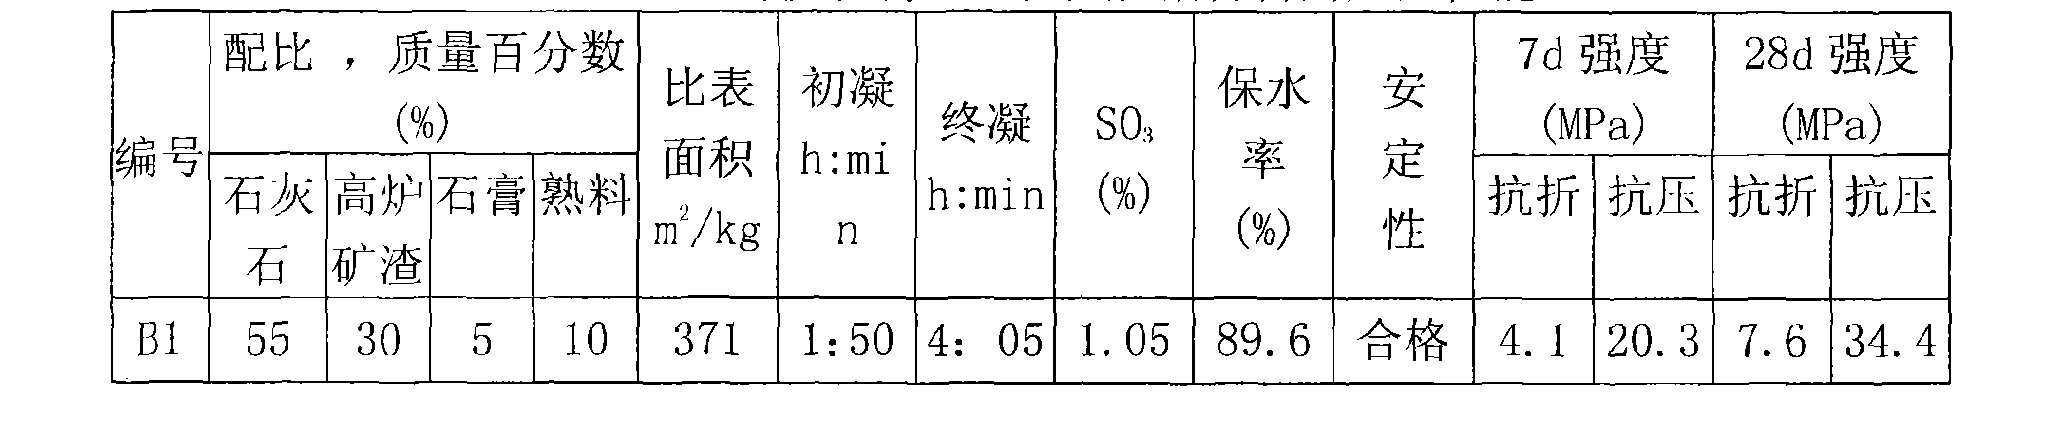 Hydraulicity cementitious materials and preparation method thereof